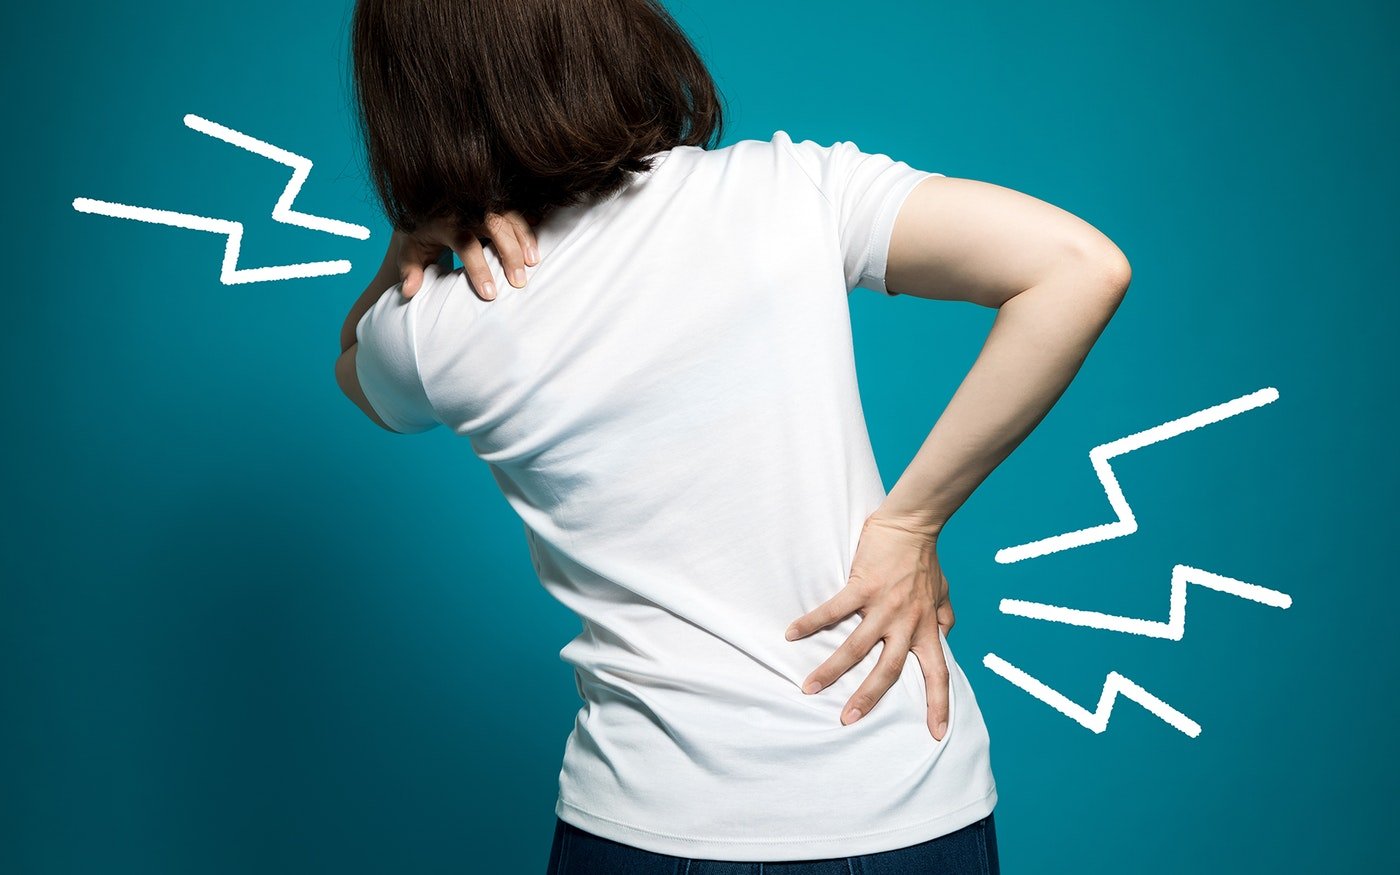 Does Bad Posture Cause Back Pain?